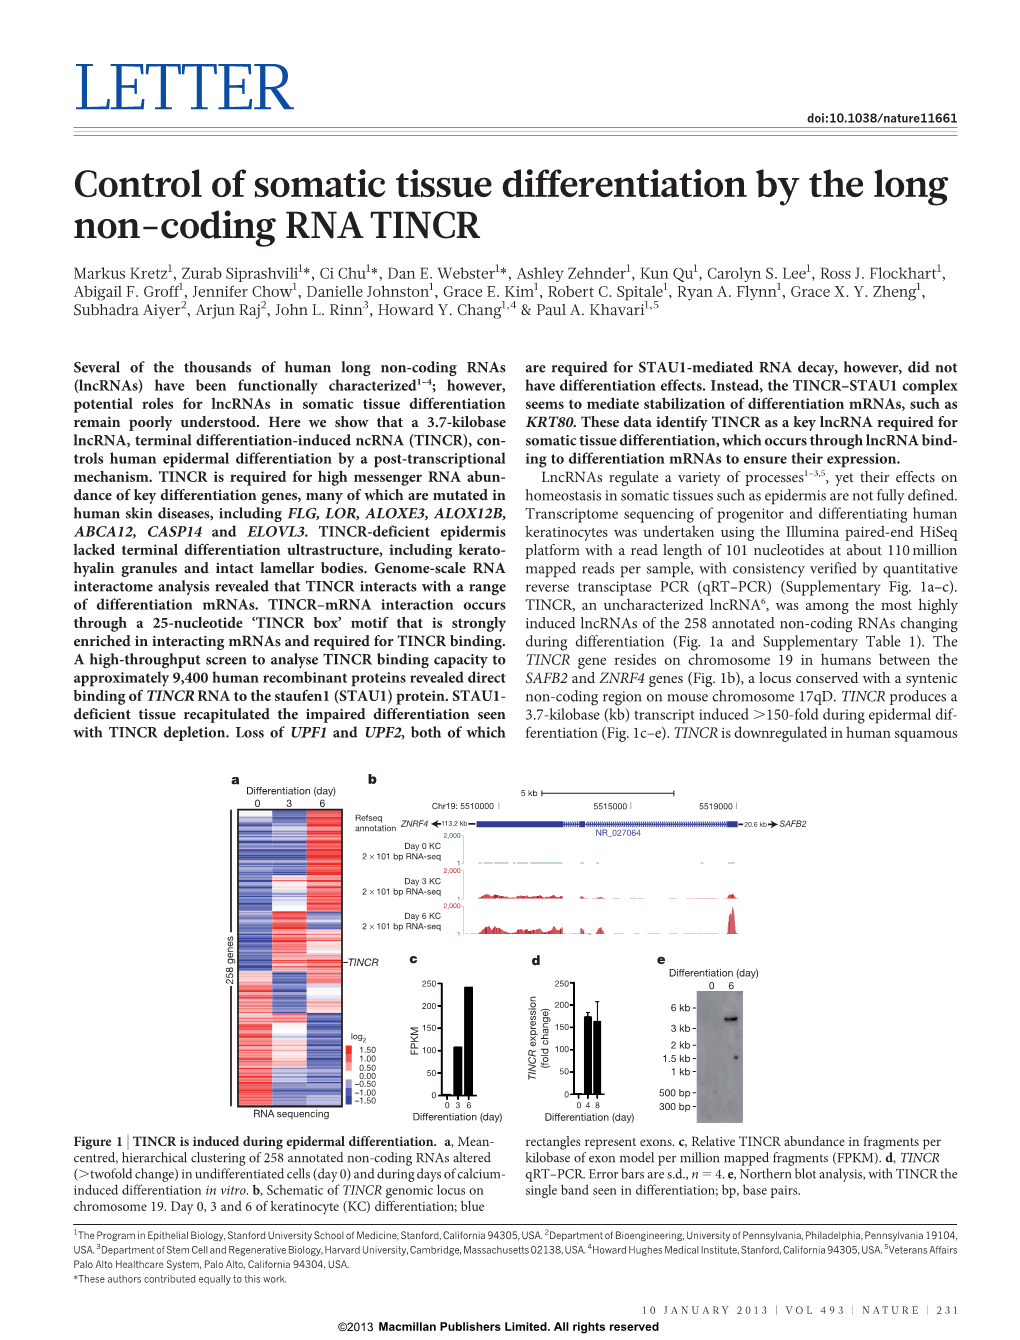 Control of Somatic Tissue Differentiation by the Long Non-Coding RNA TINCR